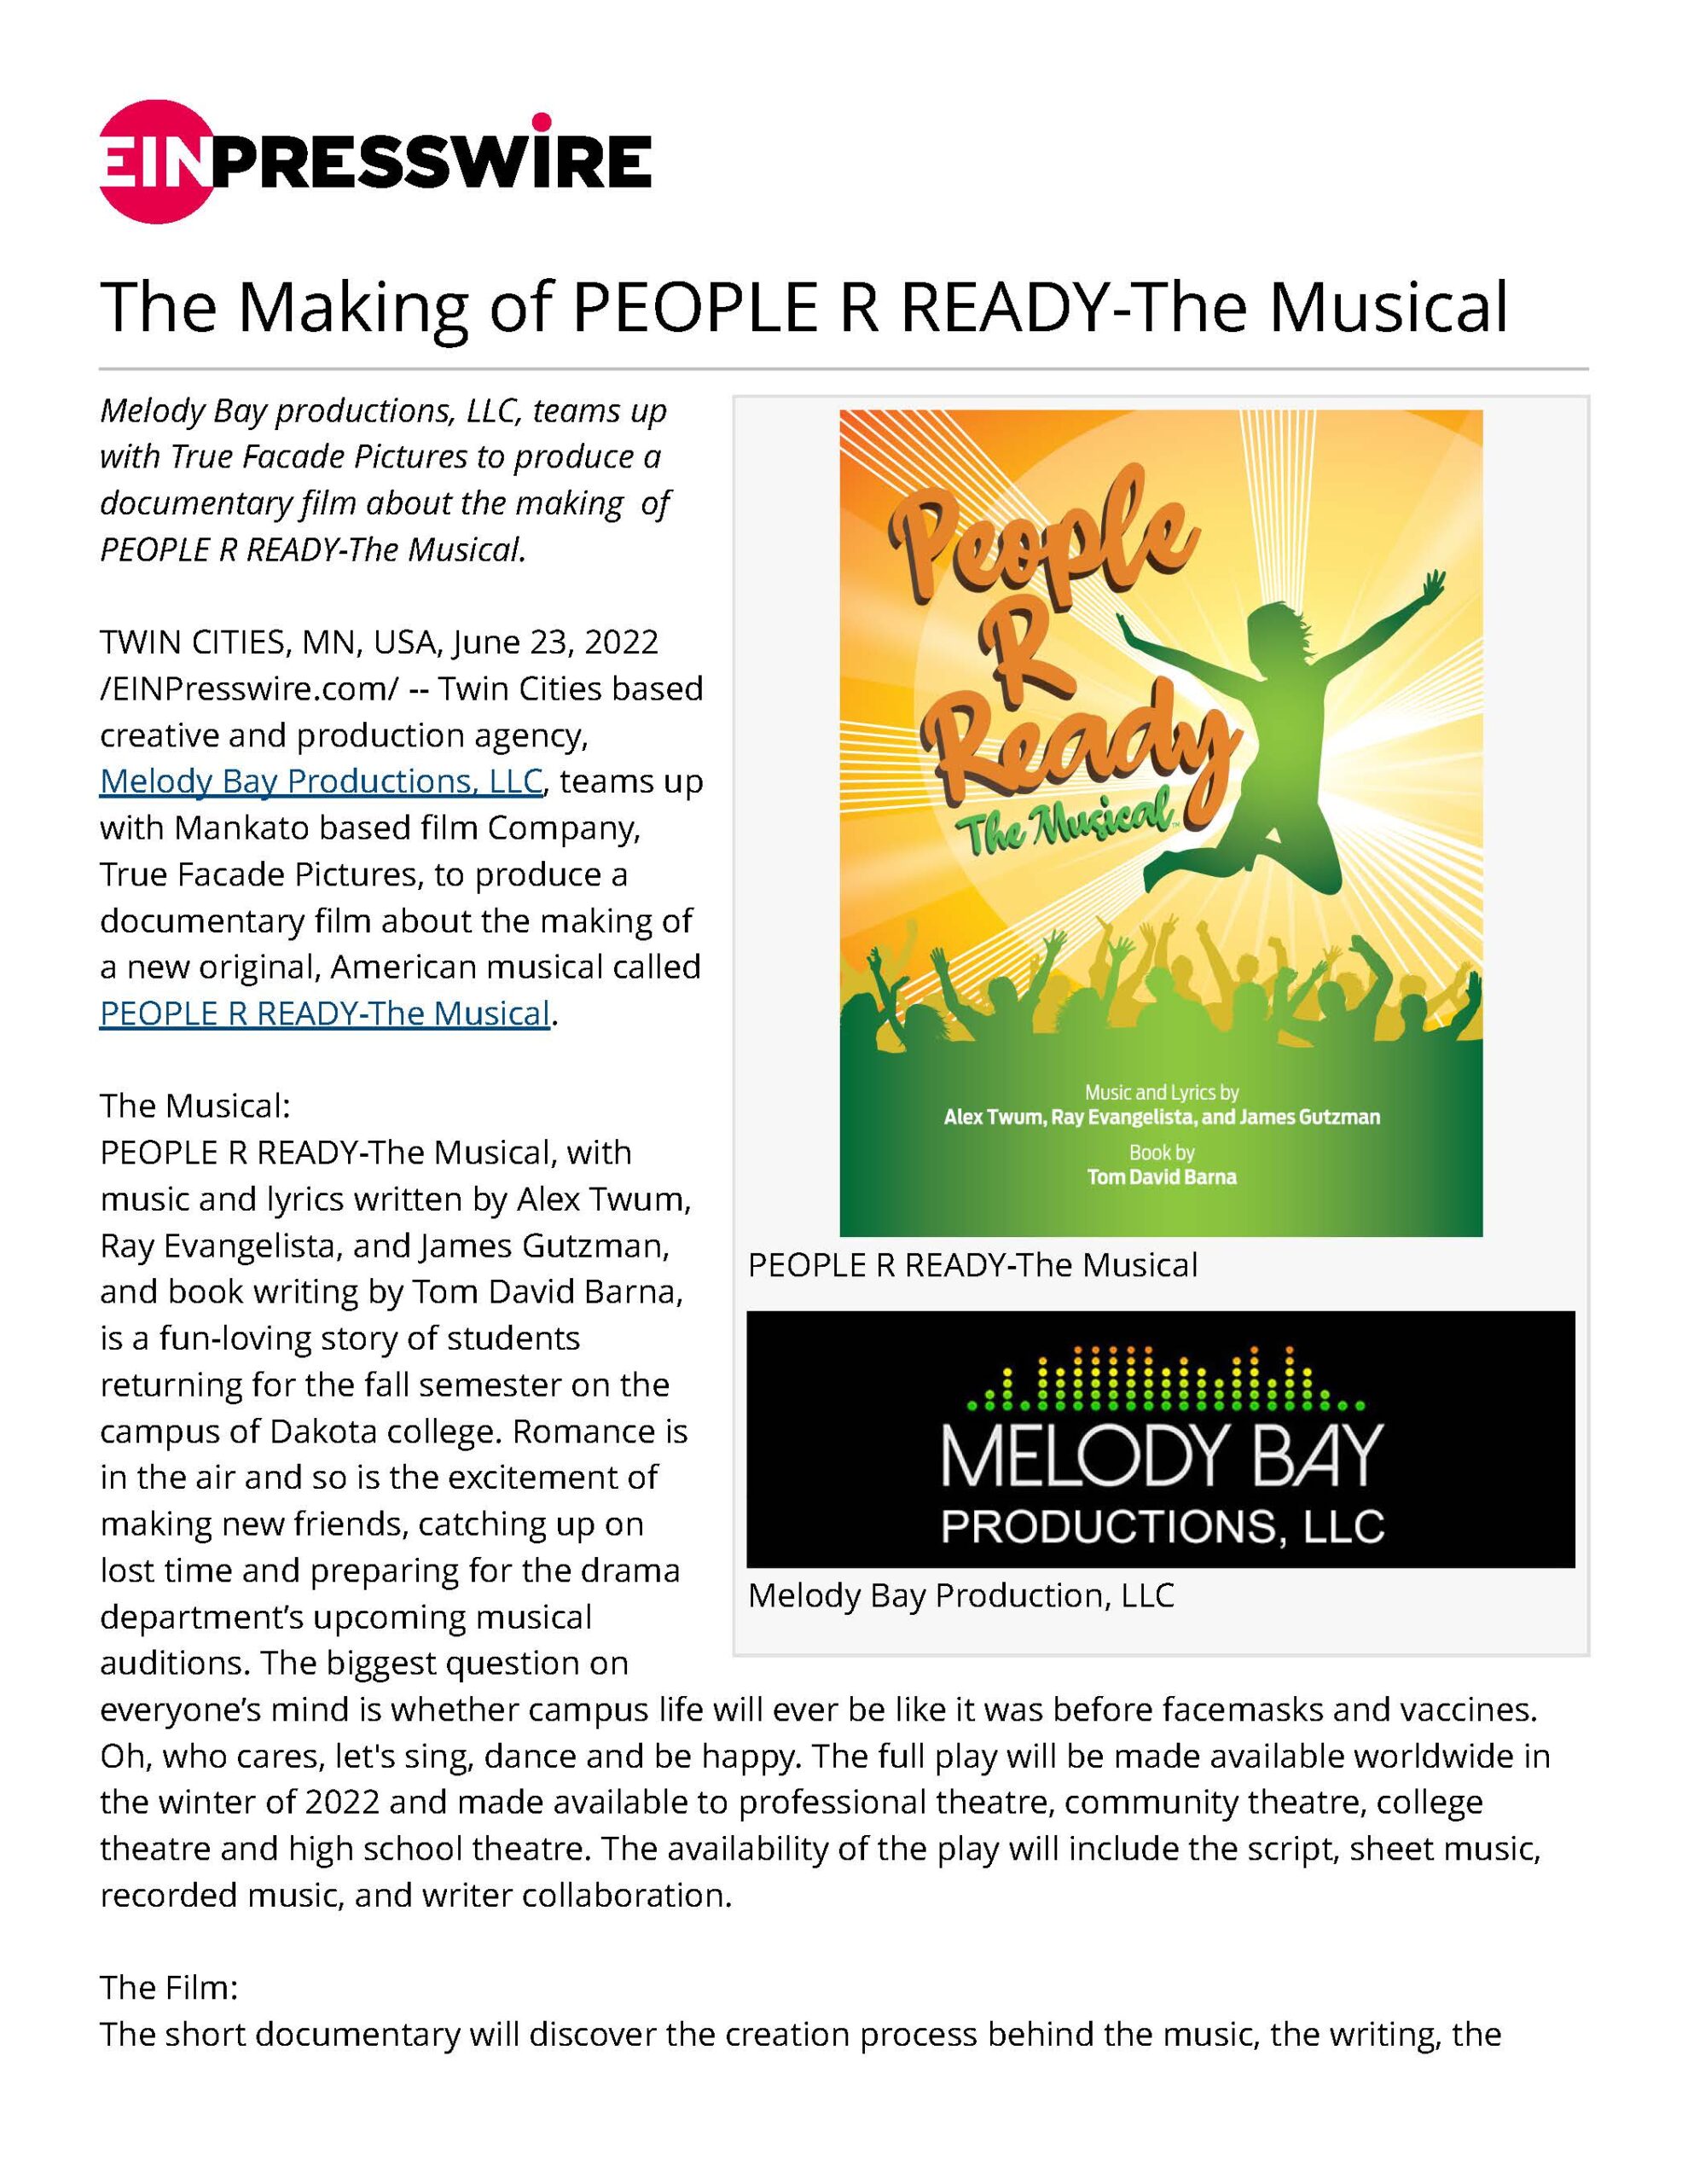 https://melodybaypro.com/the-making-of-people-r-ready-the-musical/